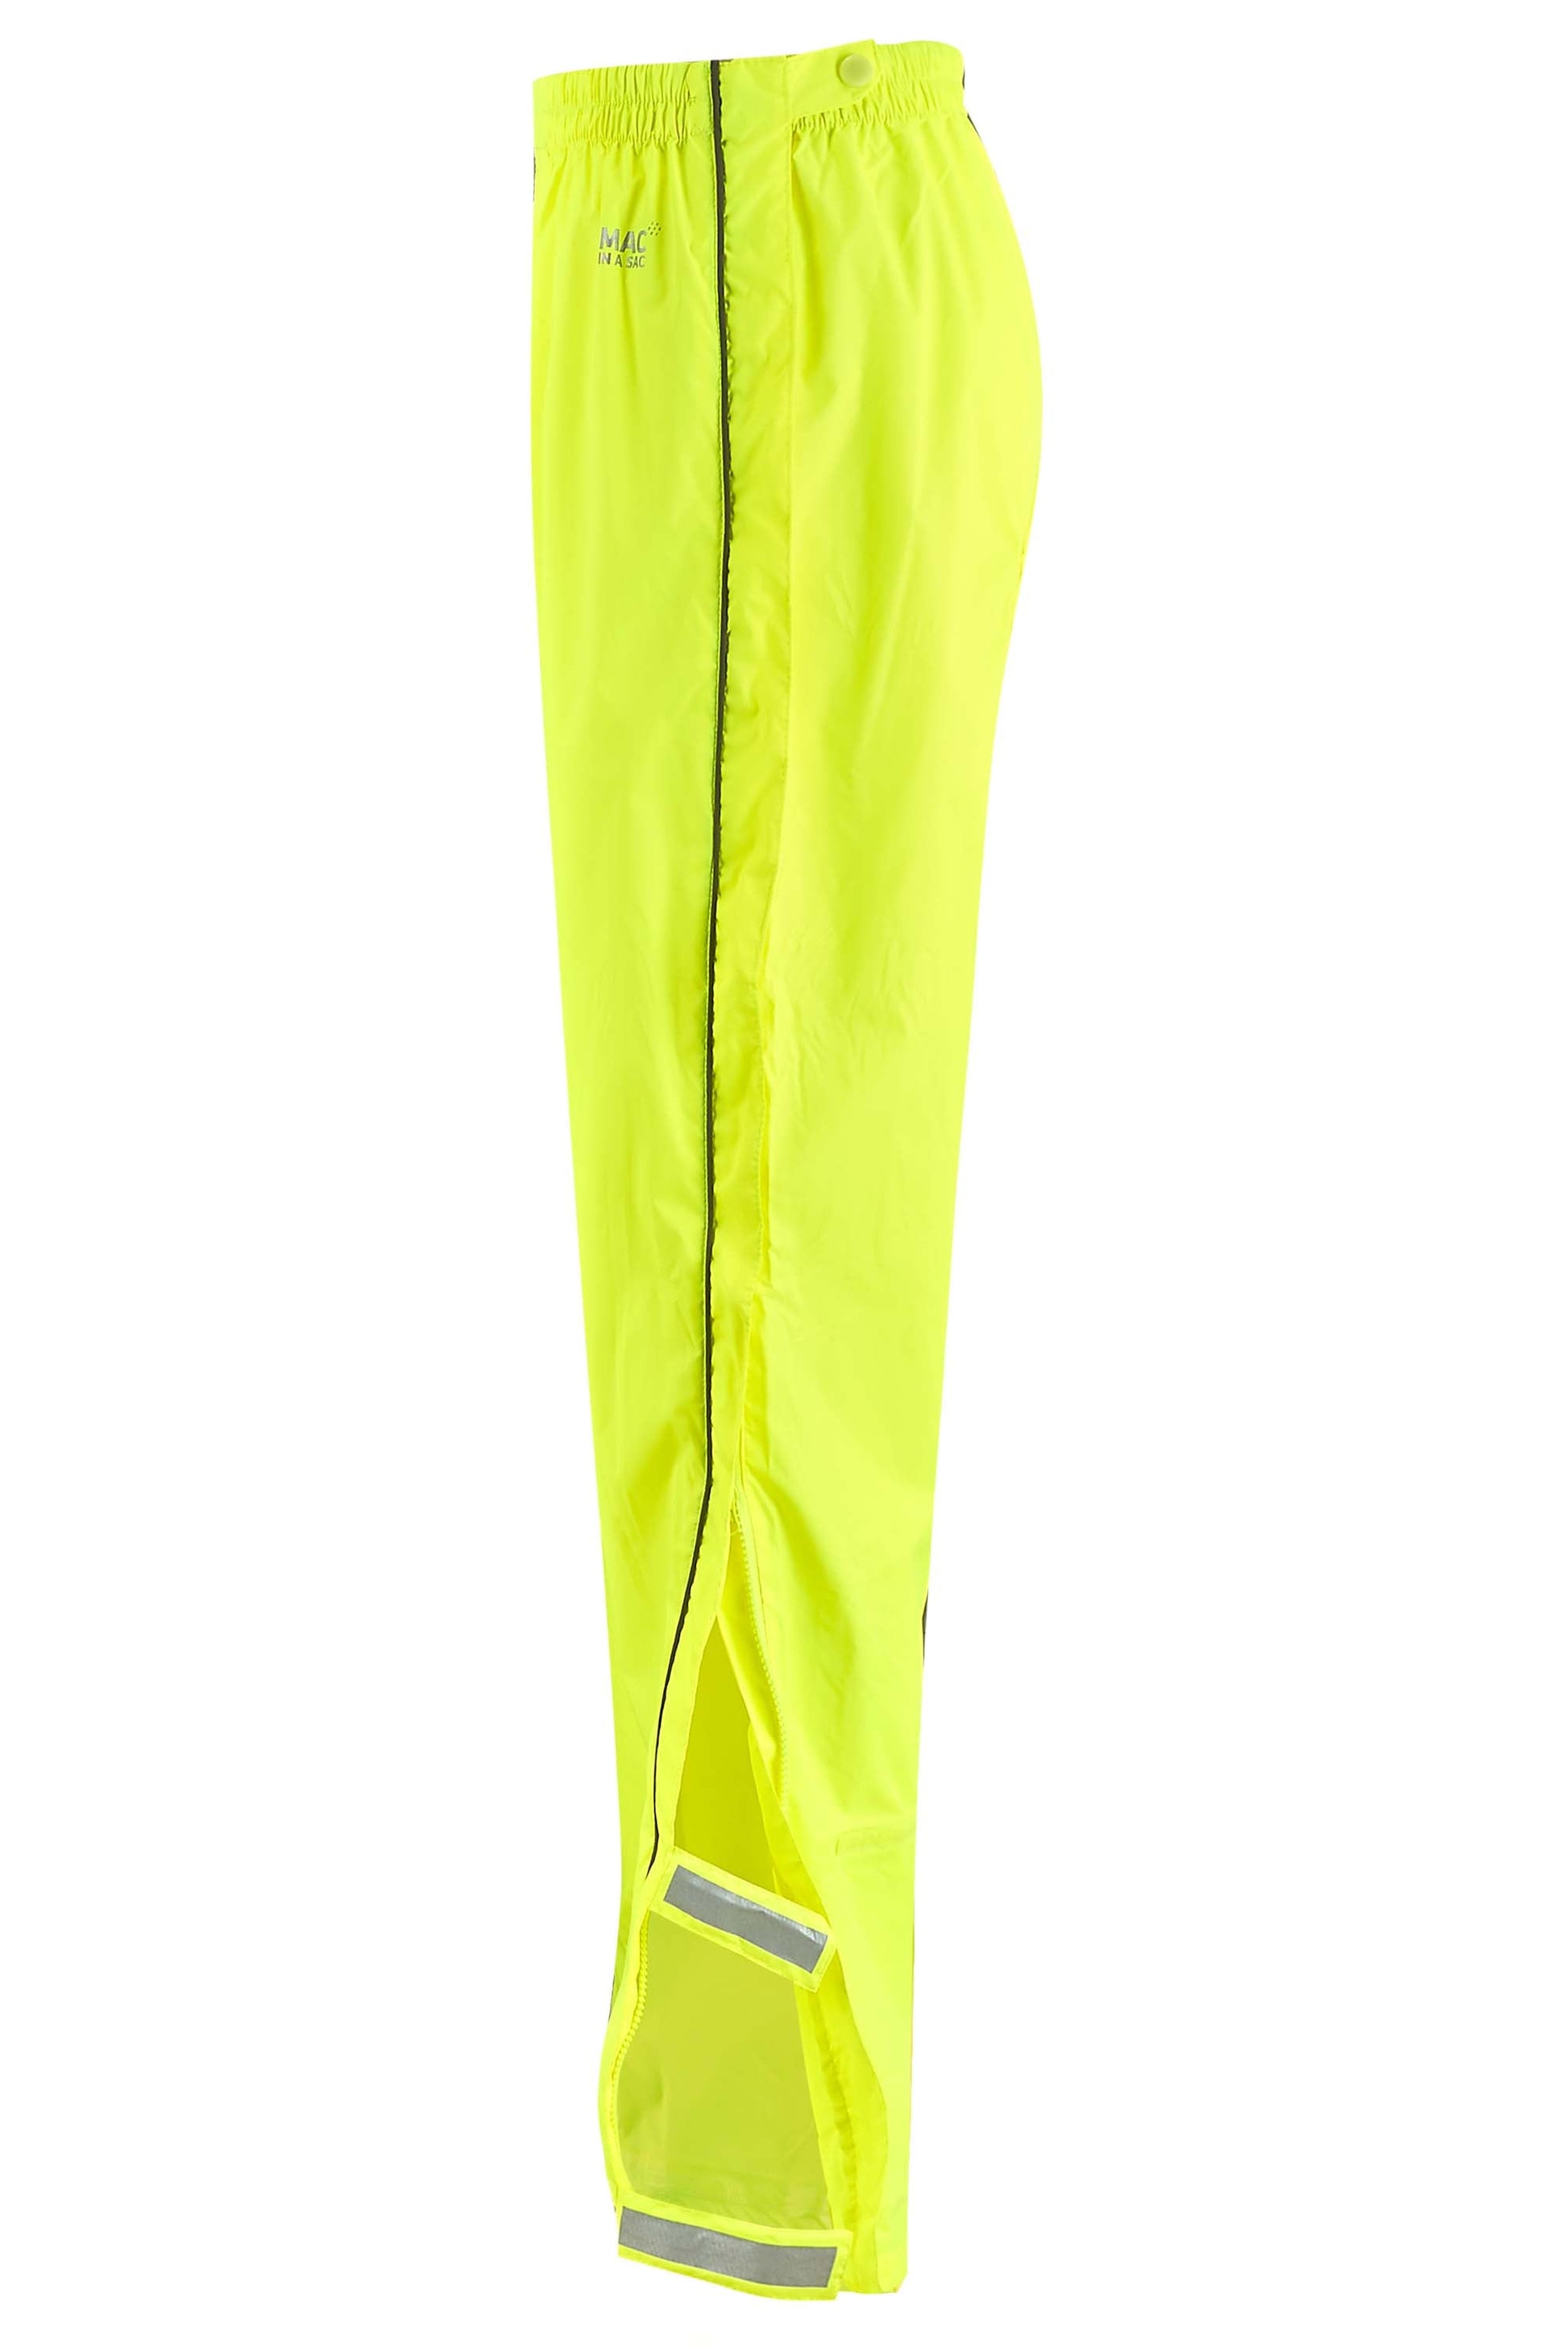 Mac In A Sac Full Zip 2 Packable Overtrouser - Neon Yellow